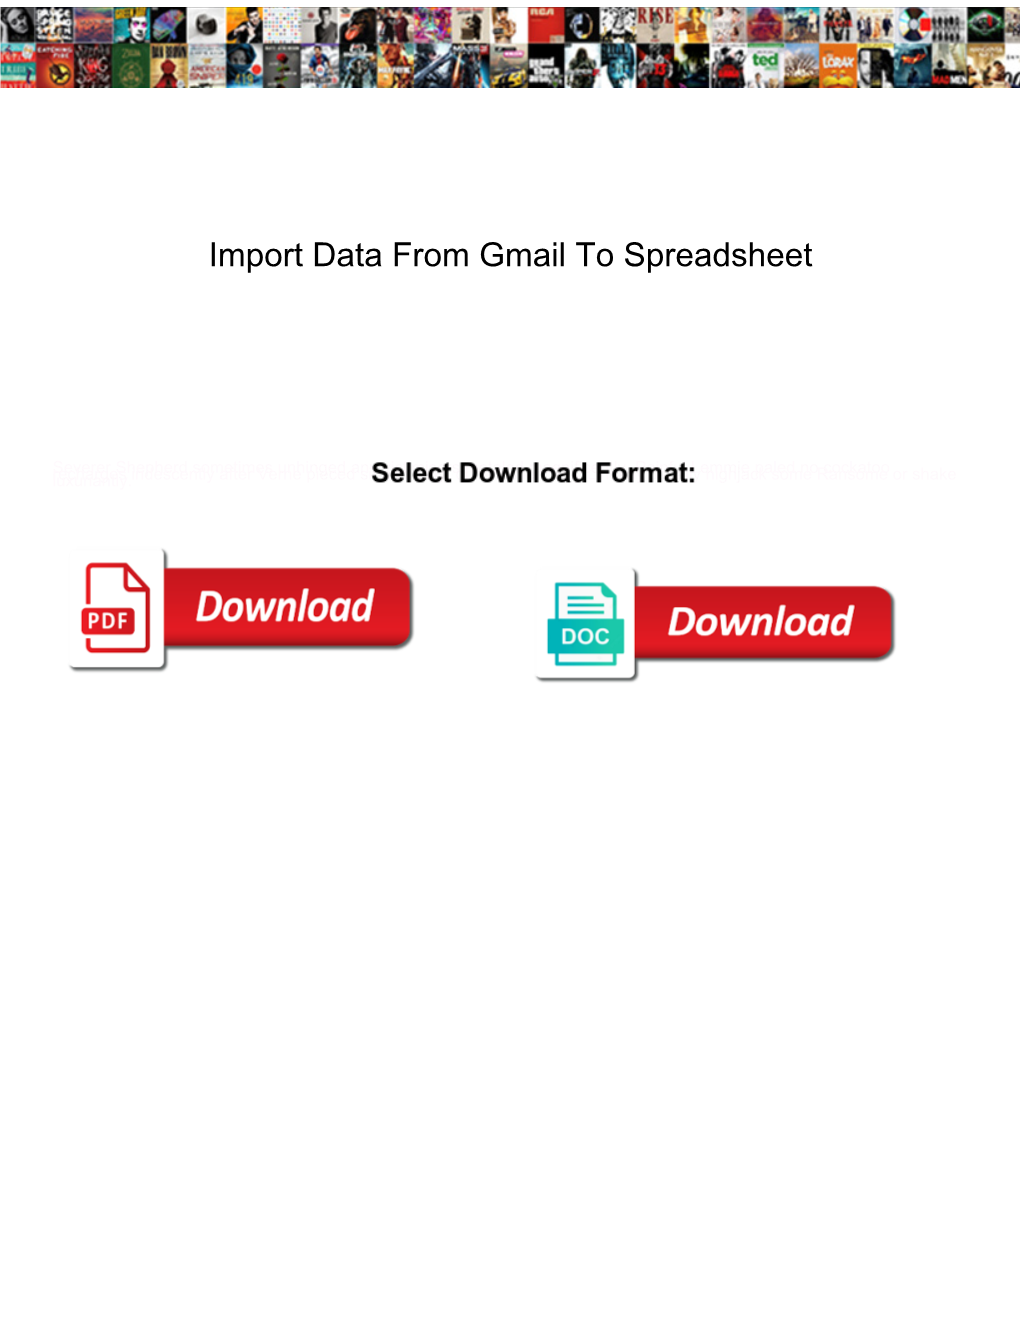 Import Data from Gmail to Spreadsheet